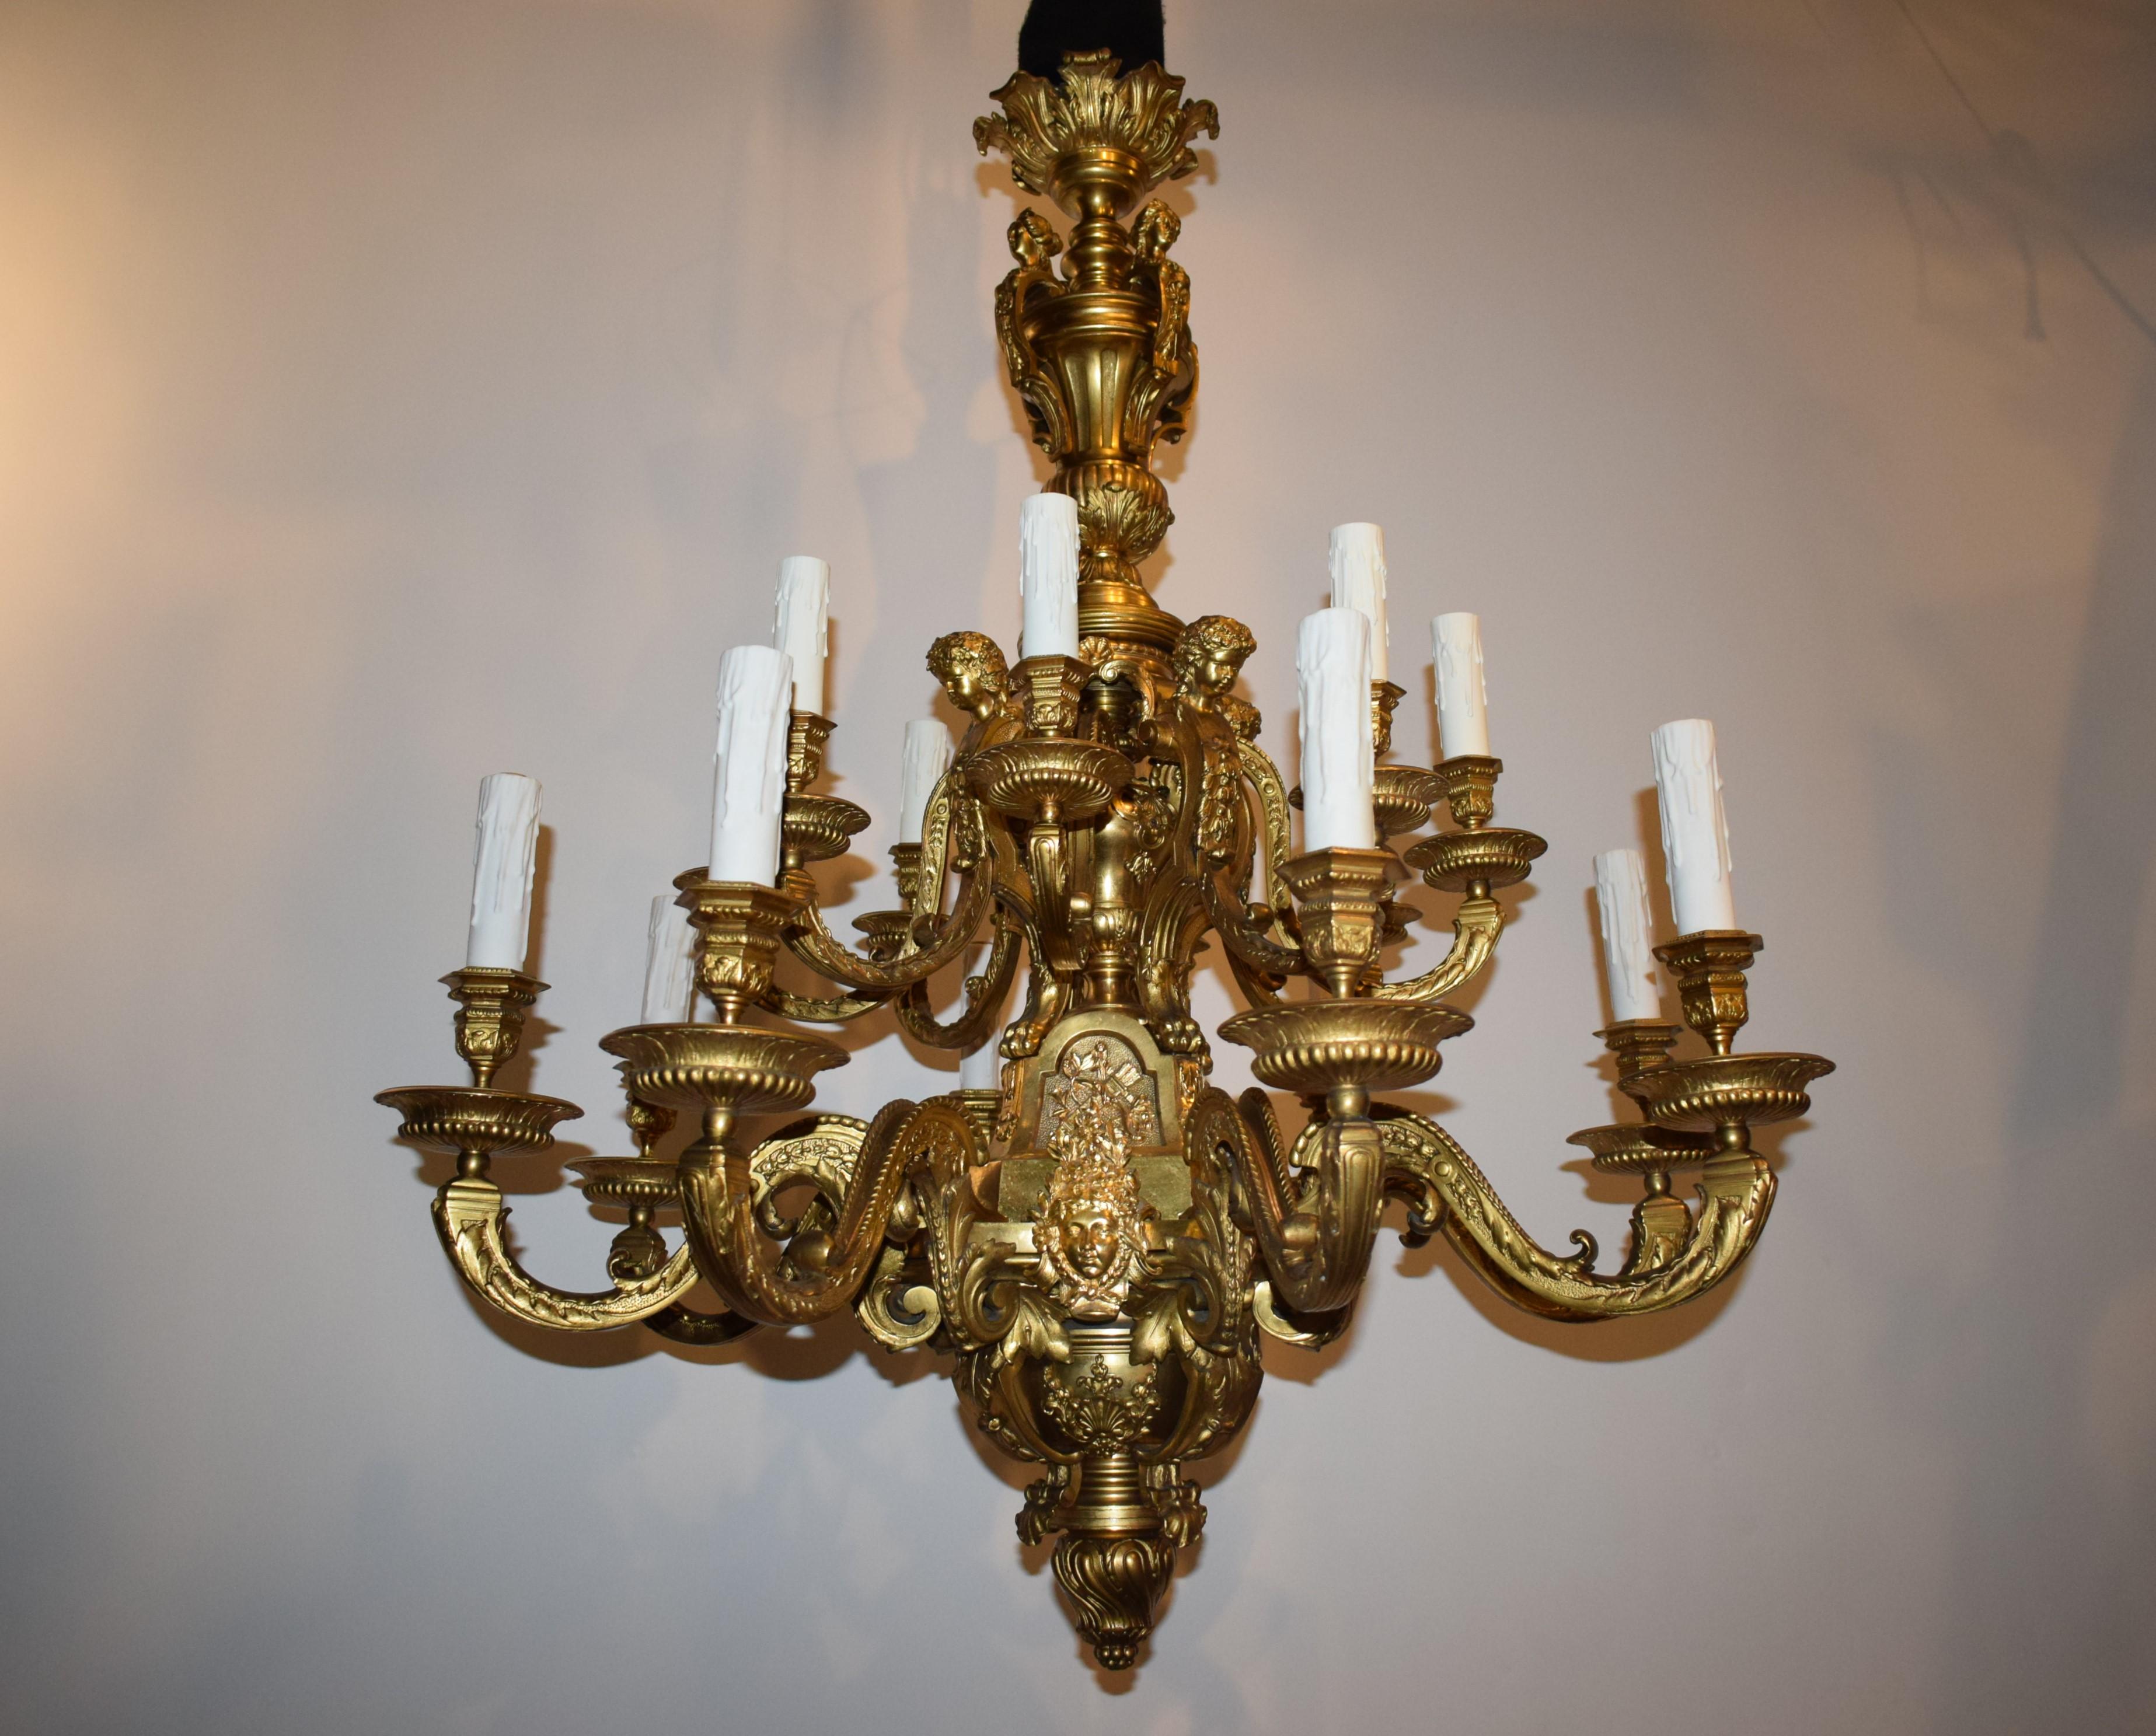 A Superb Regency style gilt bronze chandelier. Exquisite detail. Original bright and matte finish. 16 lights in two tiers. France, circa 1900.
Dimensions: Height 46